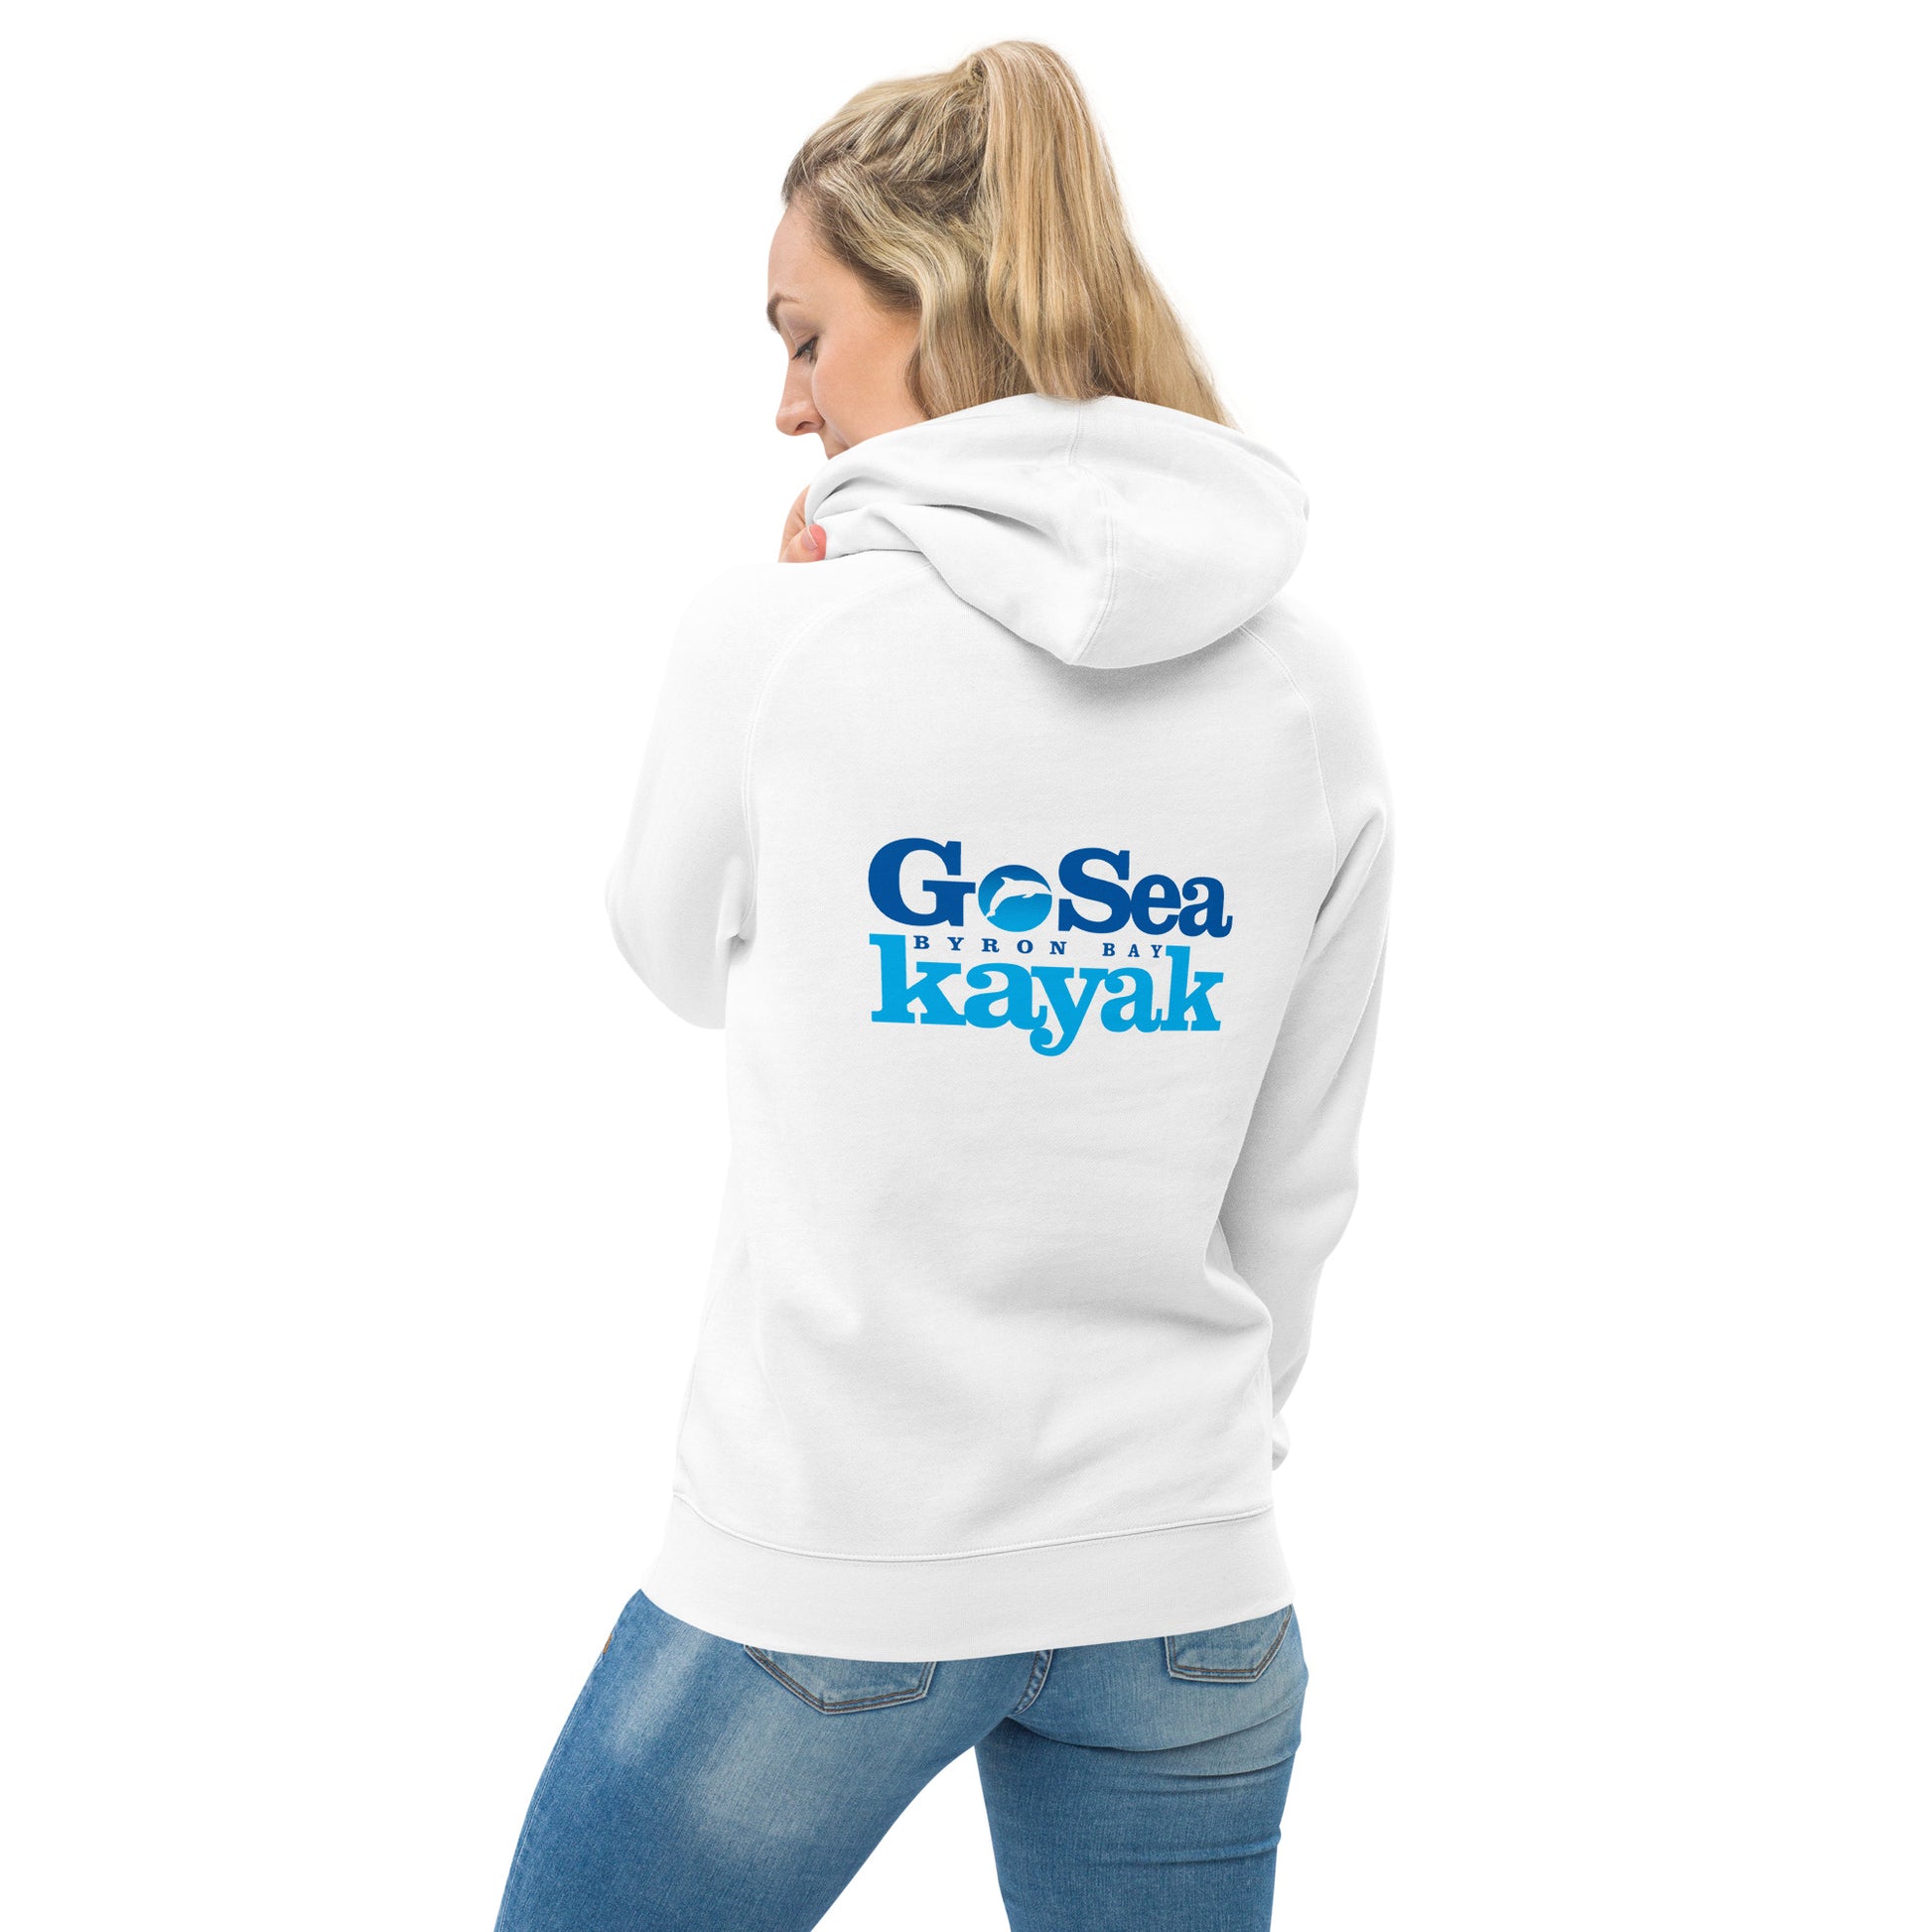  Unisex Hoodie - White - Back view being warn by woman - Go Sea Kayak Byron Bay logo on back and front, Kangaroo pocket on front - Genuine Byron Bay Merchandise | Produced by Go Sea Kayak Byron Bay 